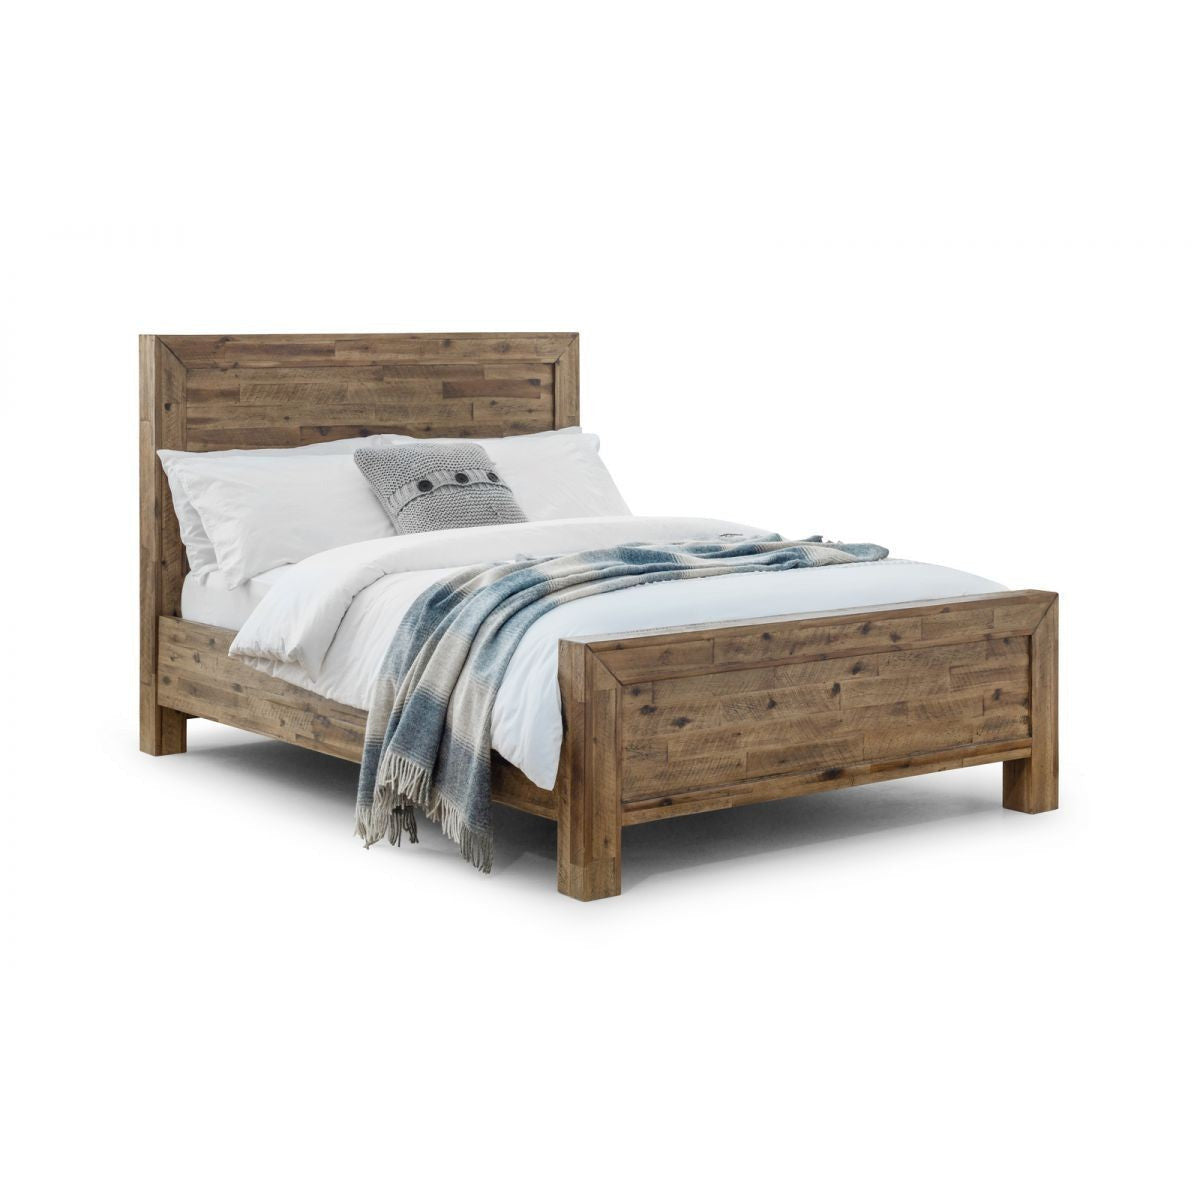 HOXTON BED SOLID HARDWOOD BED